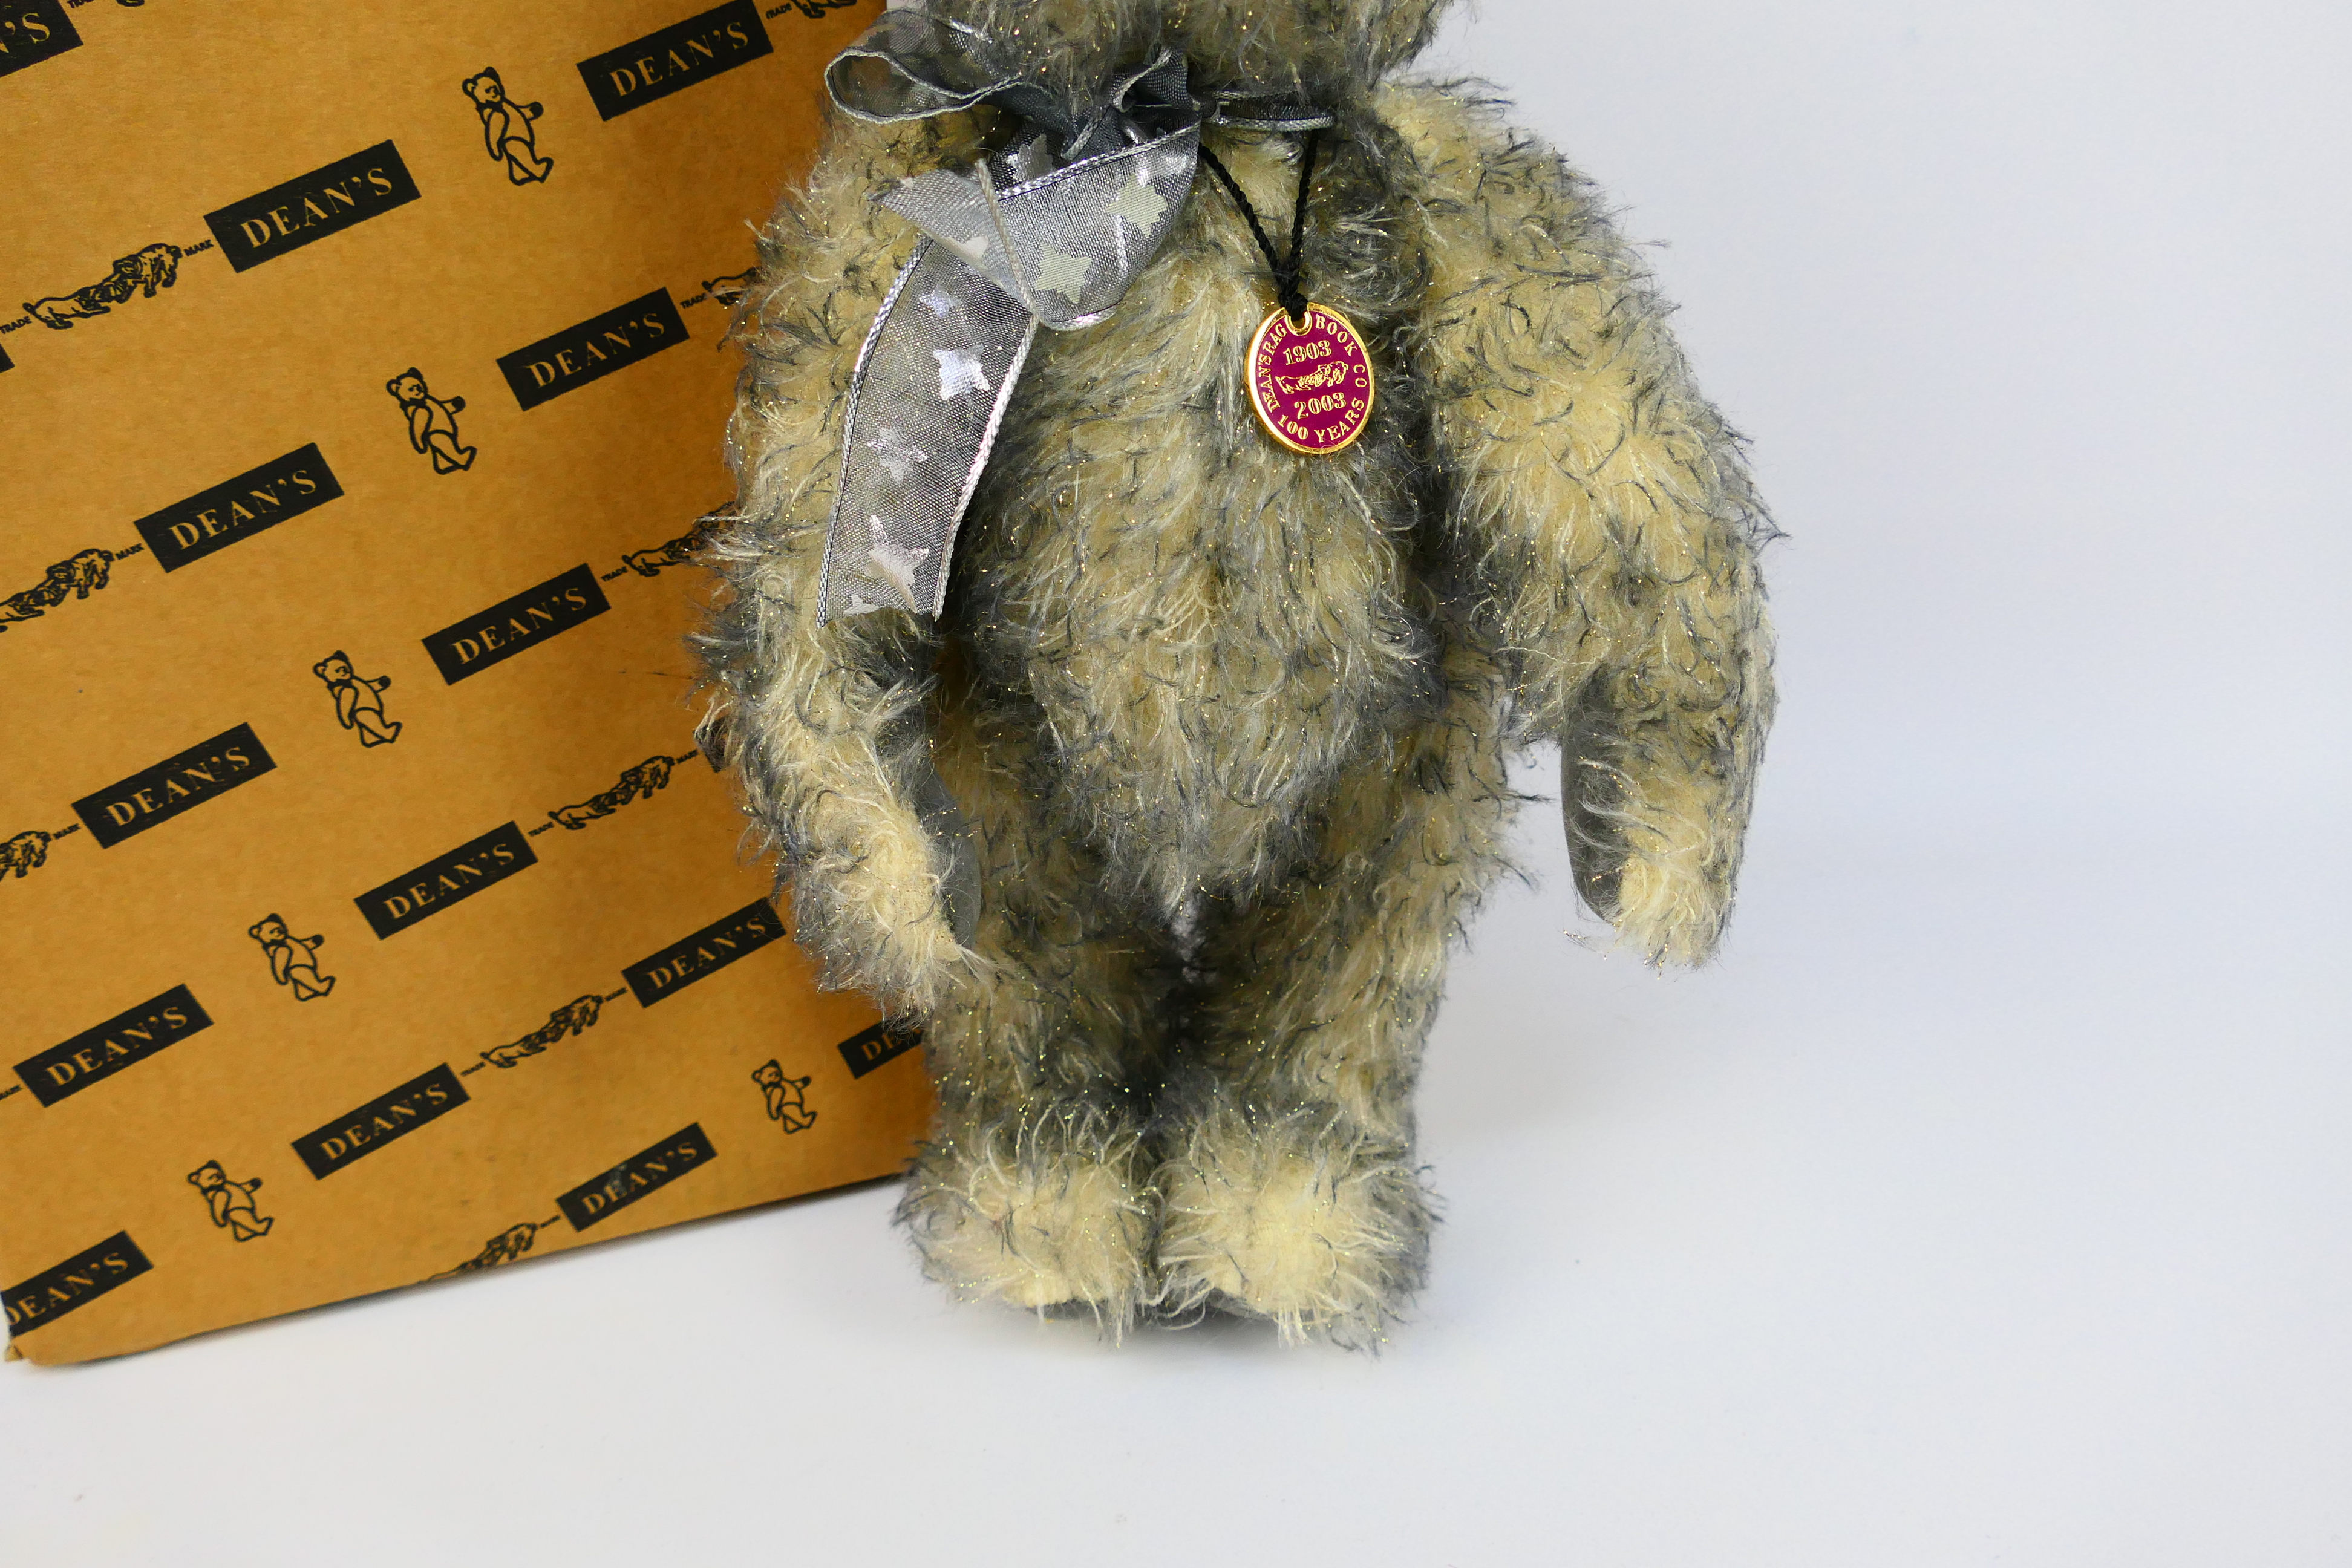 Deans Rag Book - A boxed limited edition 2003 Centenary bear named Tinsel number 23 of only 200 - Image 5 of 9